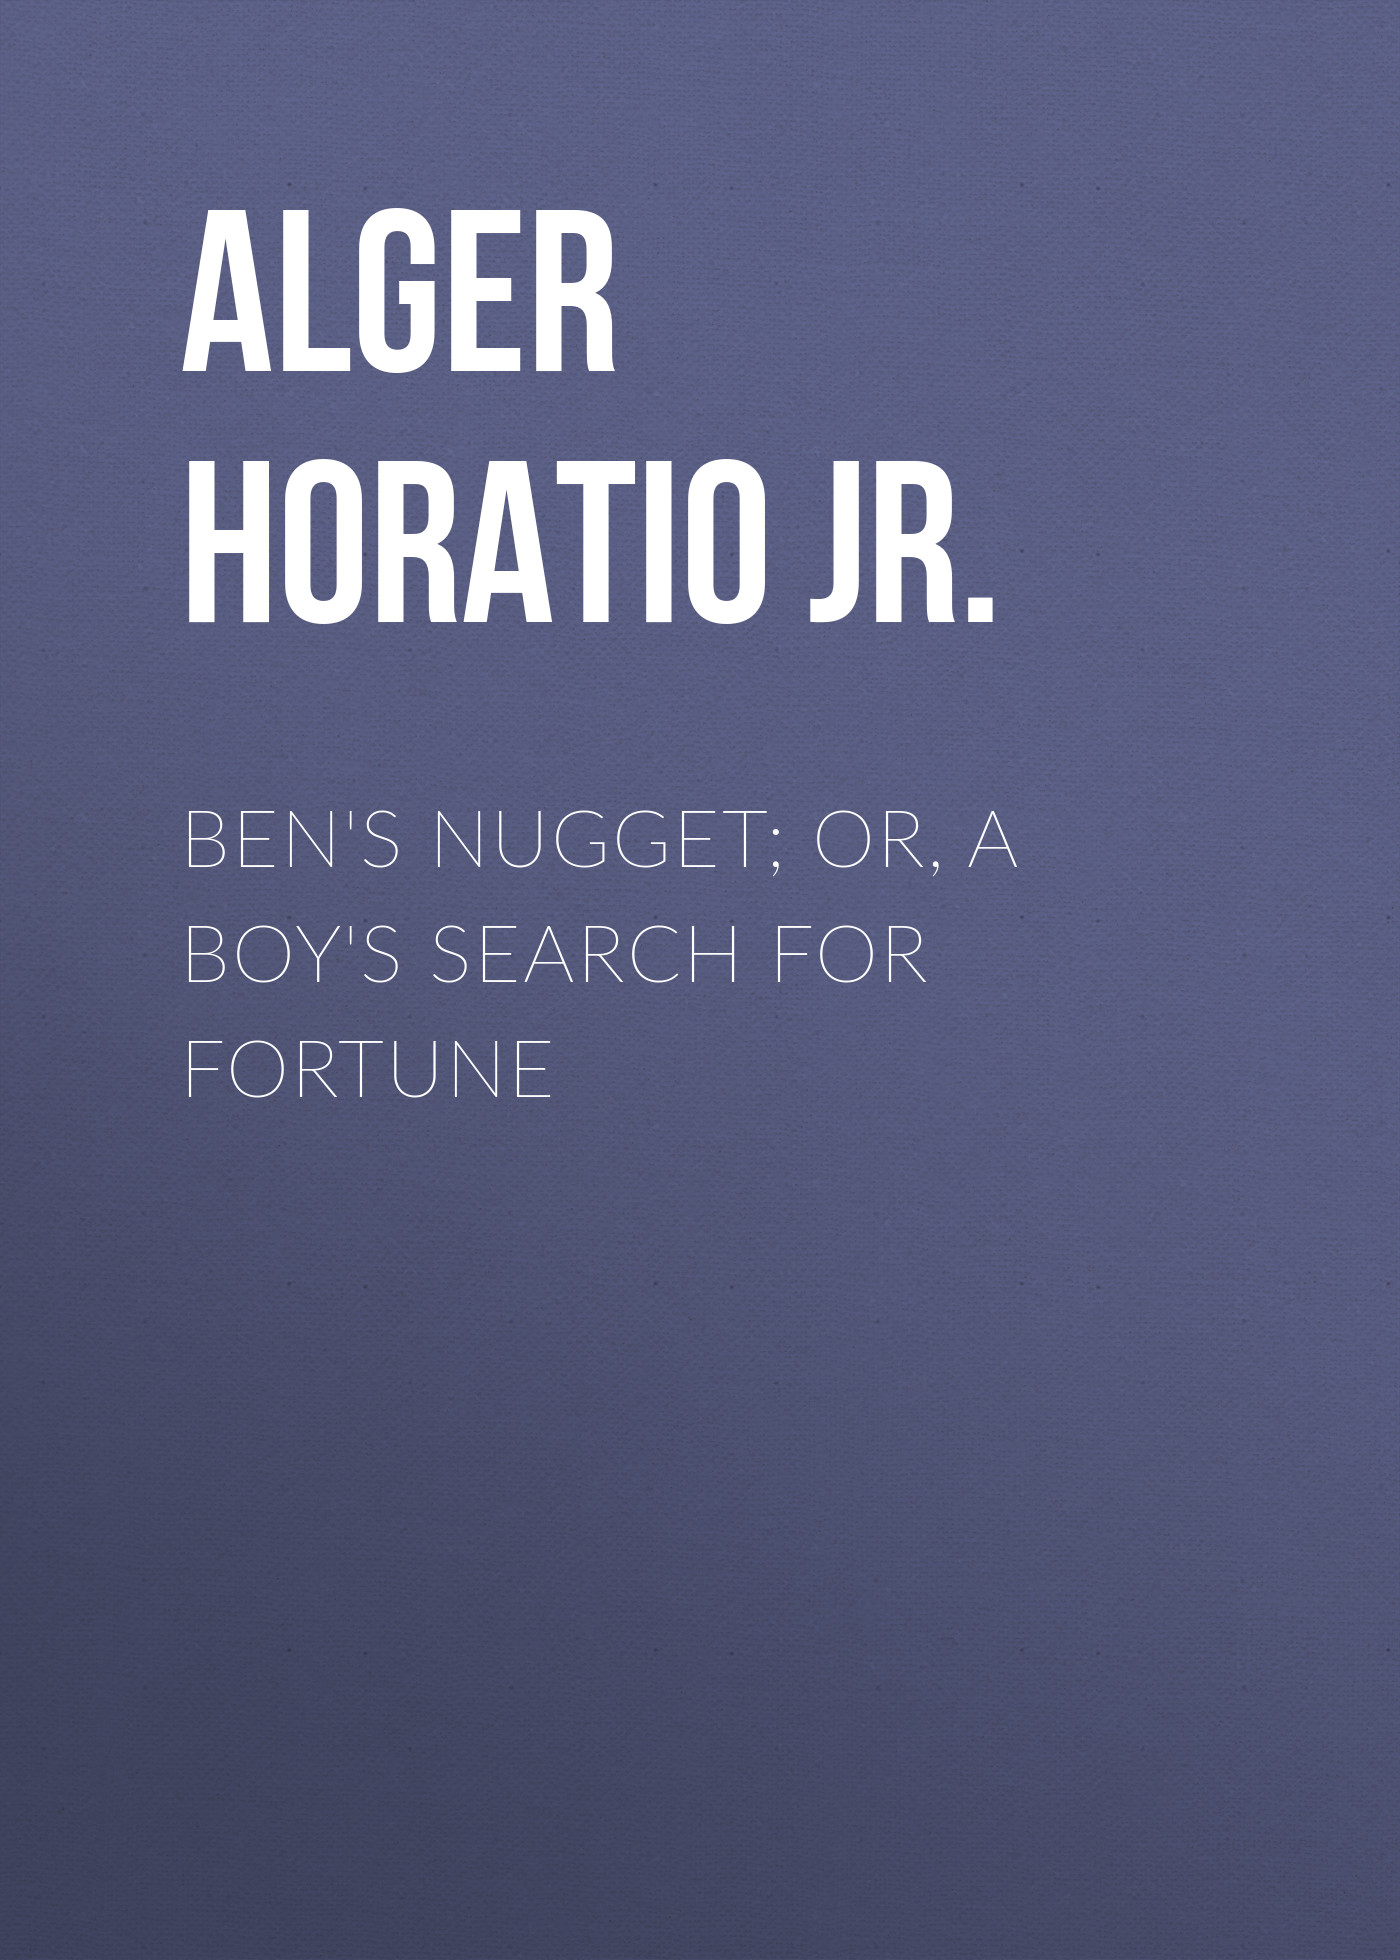 Ben's Nugget; Or, A Boy's Search For Fortune